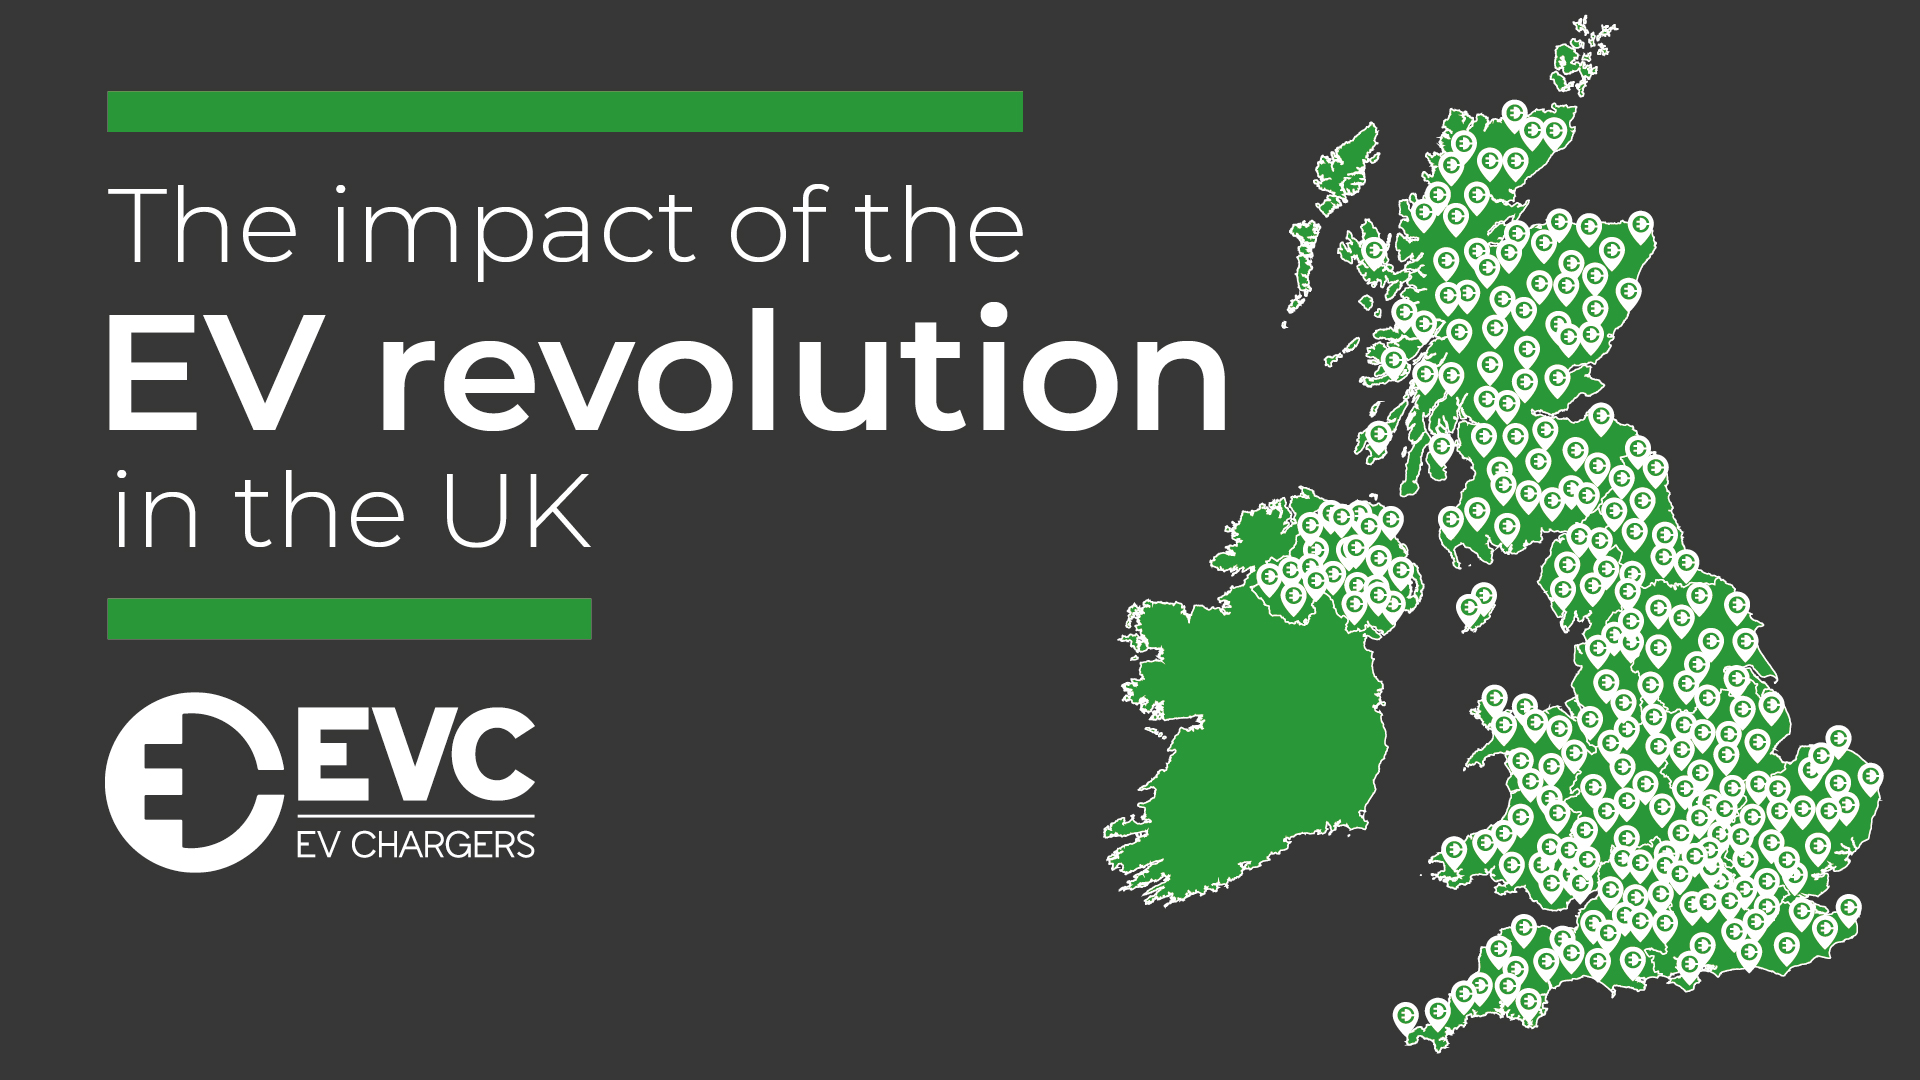 The impact of the EV revolution in the UK